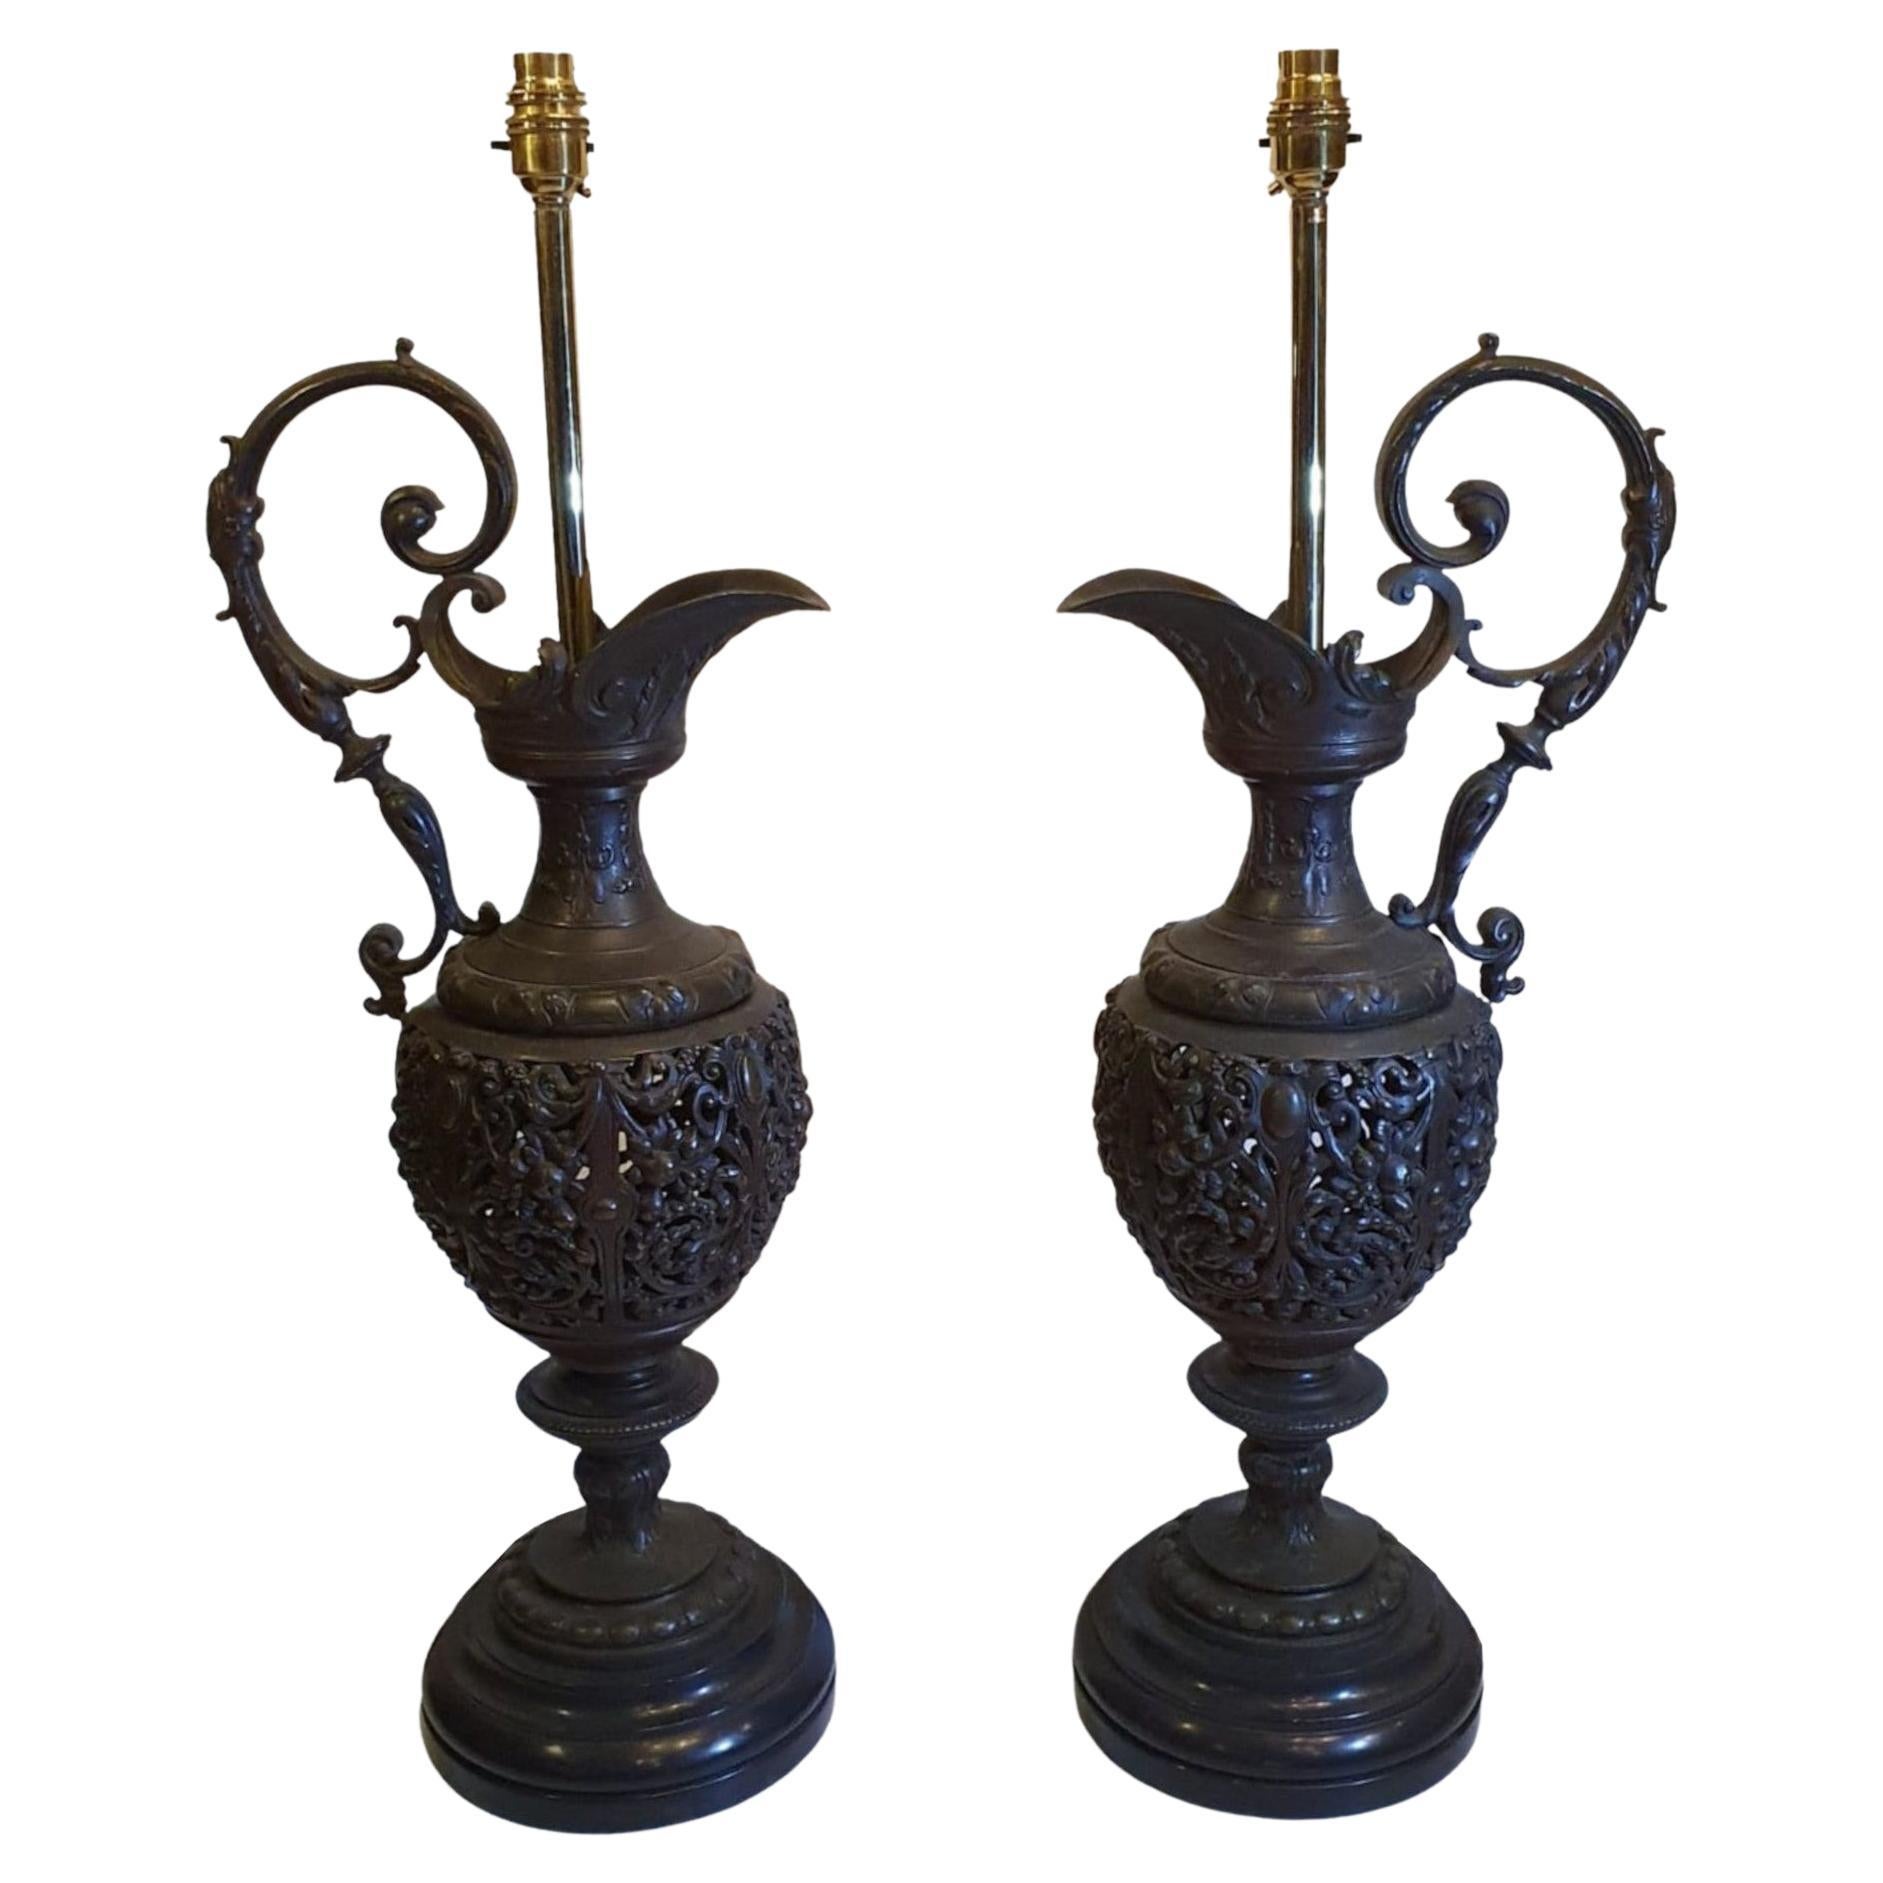 Rare Pair of 19th Century Bronze Ewers Converted to Table Lamps